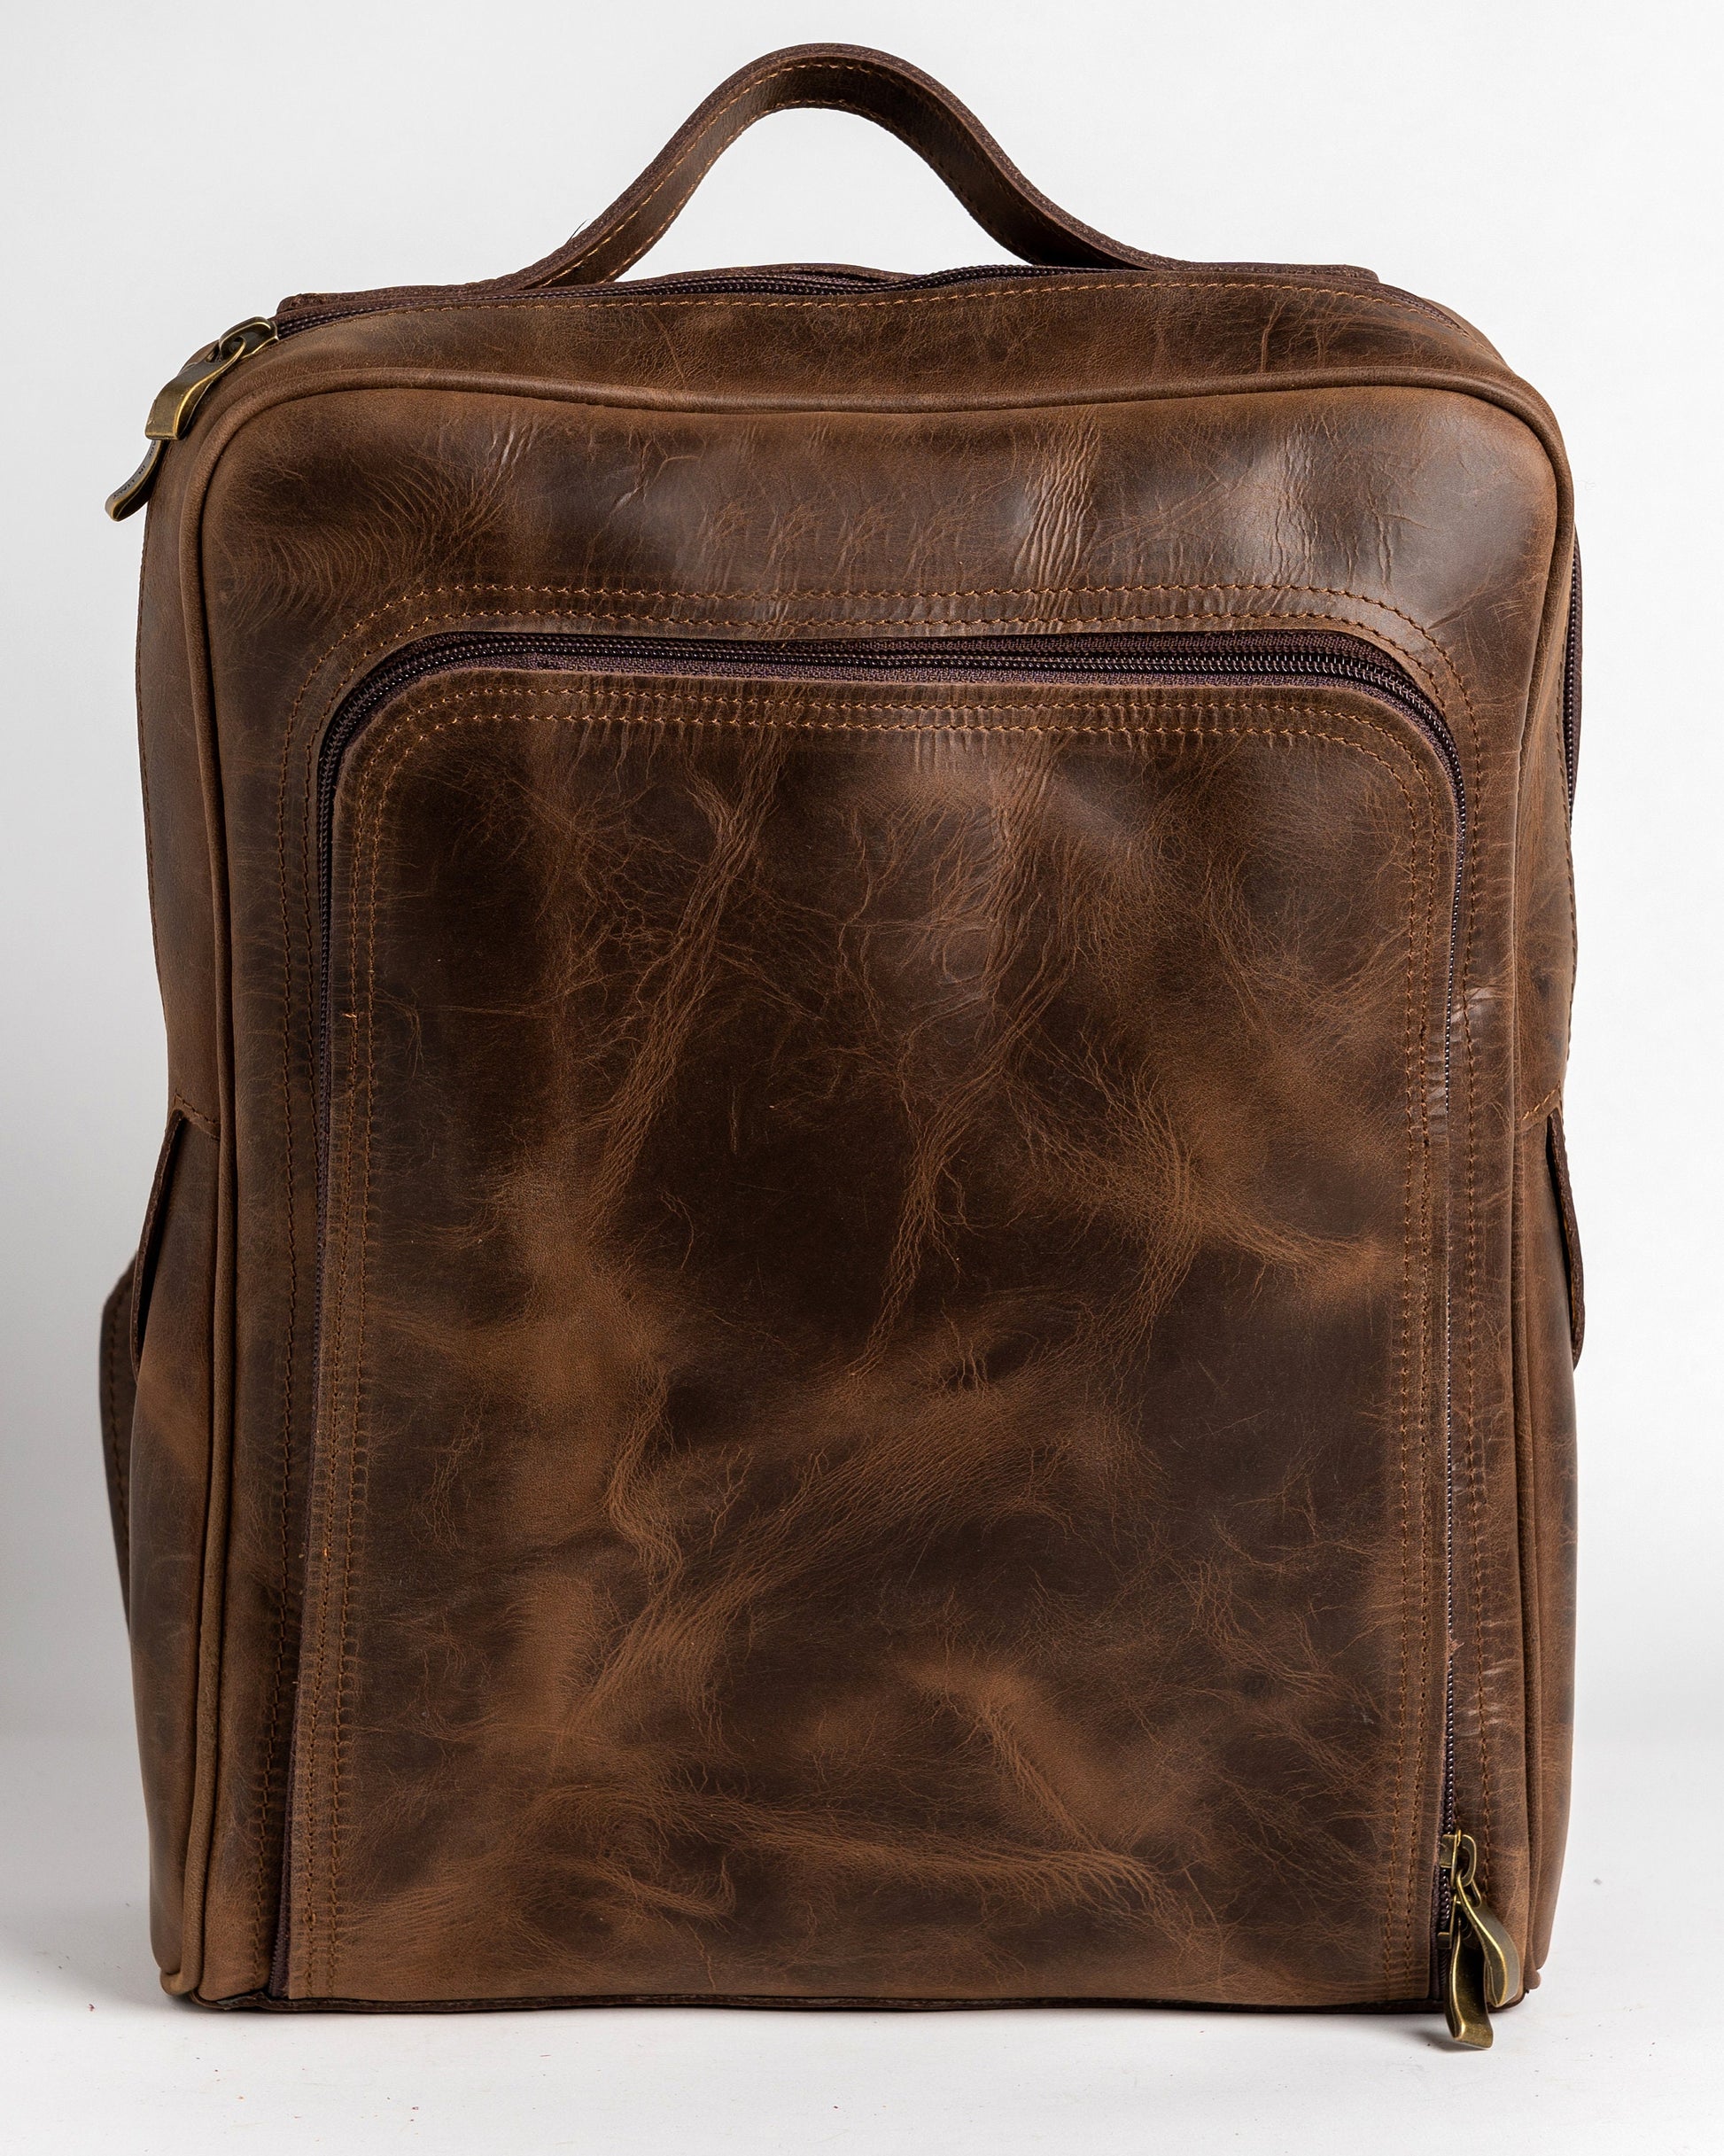 Leather backpack men, Leather rucksack, Leather backpack men laptop, Calf leather backpack